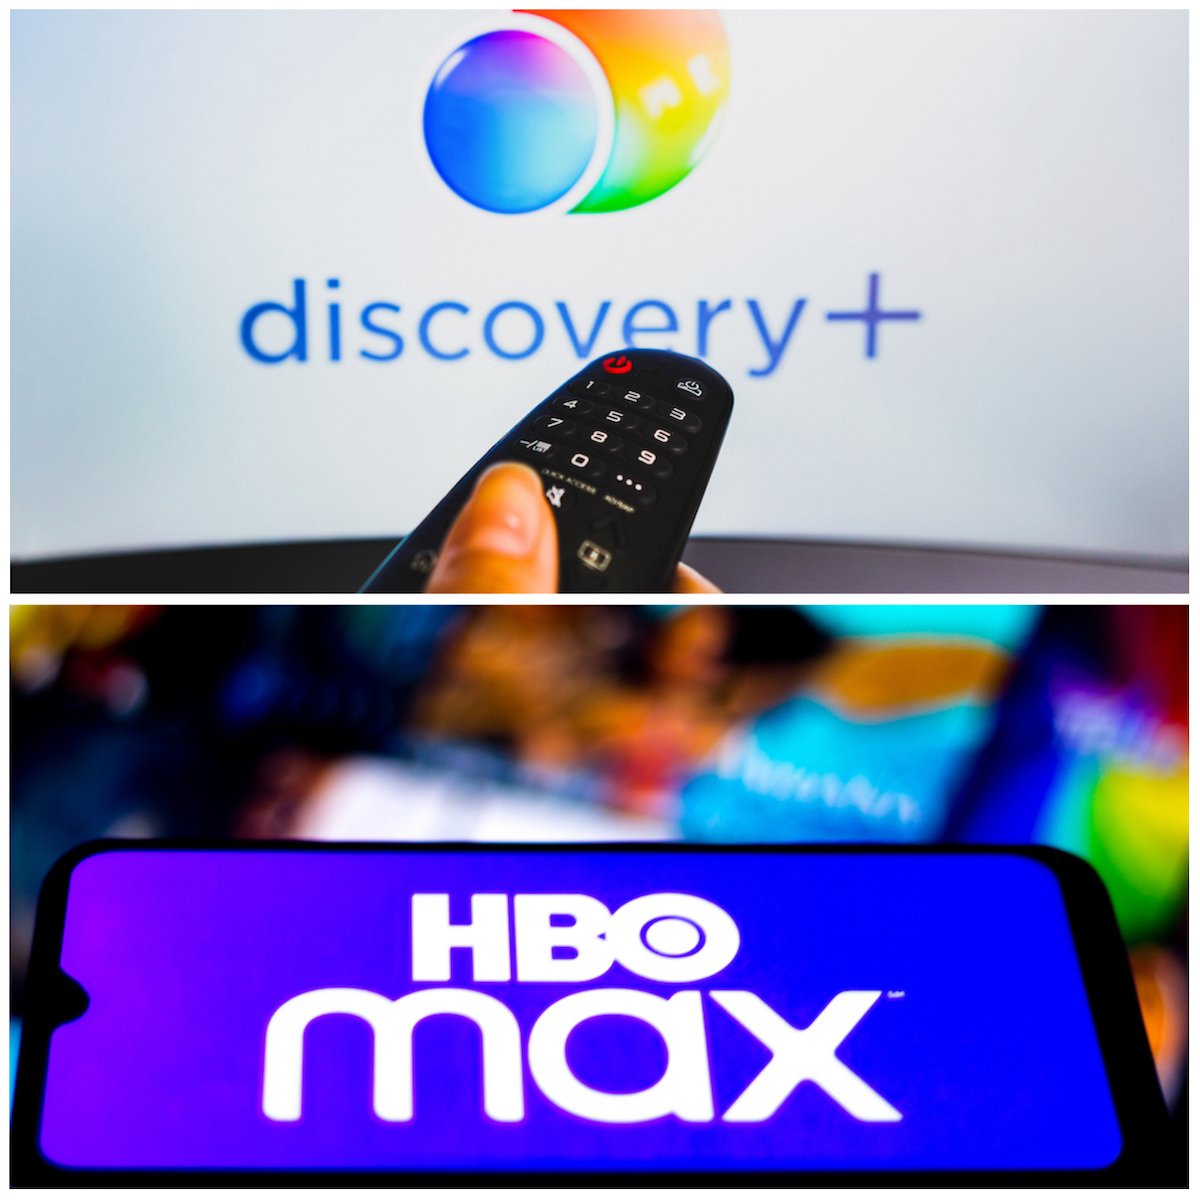 discovery plus, hbo max logos appear alongside one another following merger announcement